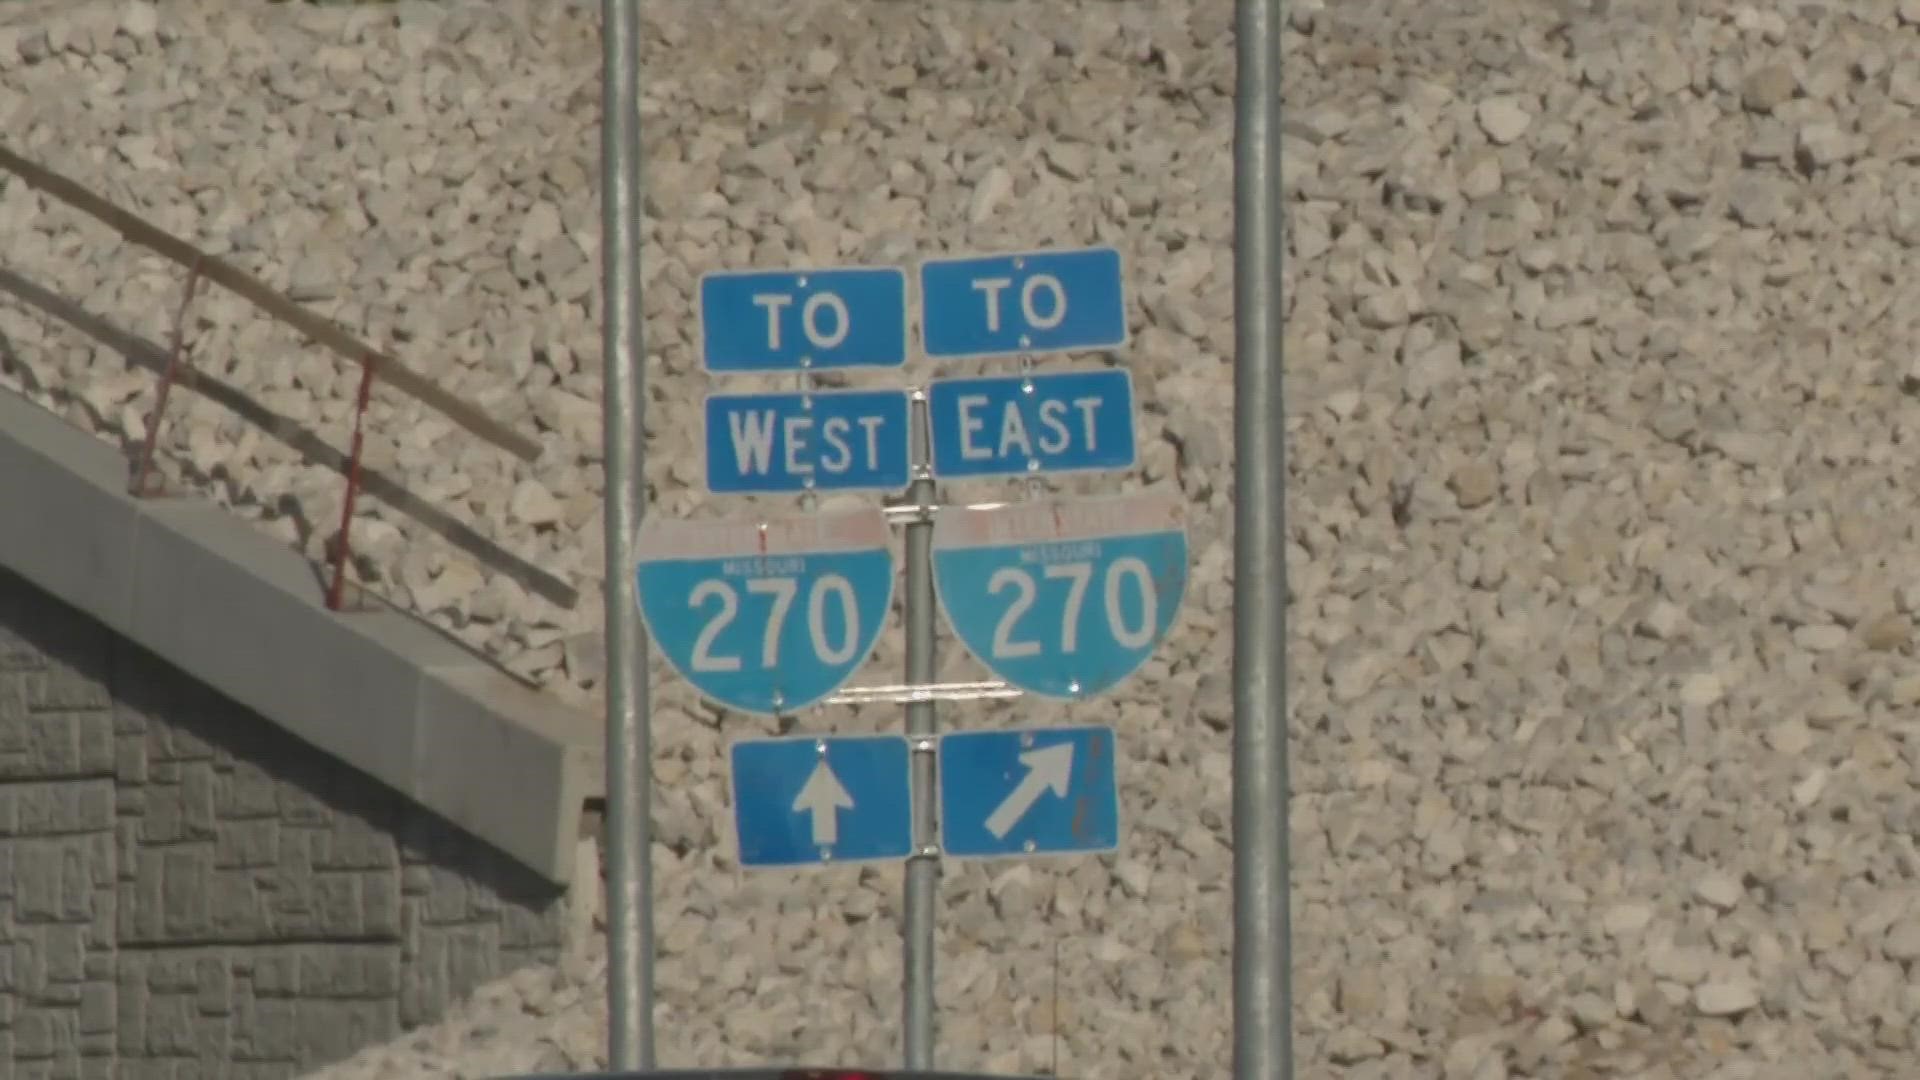 The $278 million project is on schedule to be completed at the end of 2023 according to MoDOT.